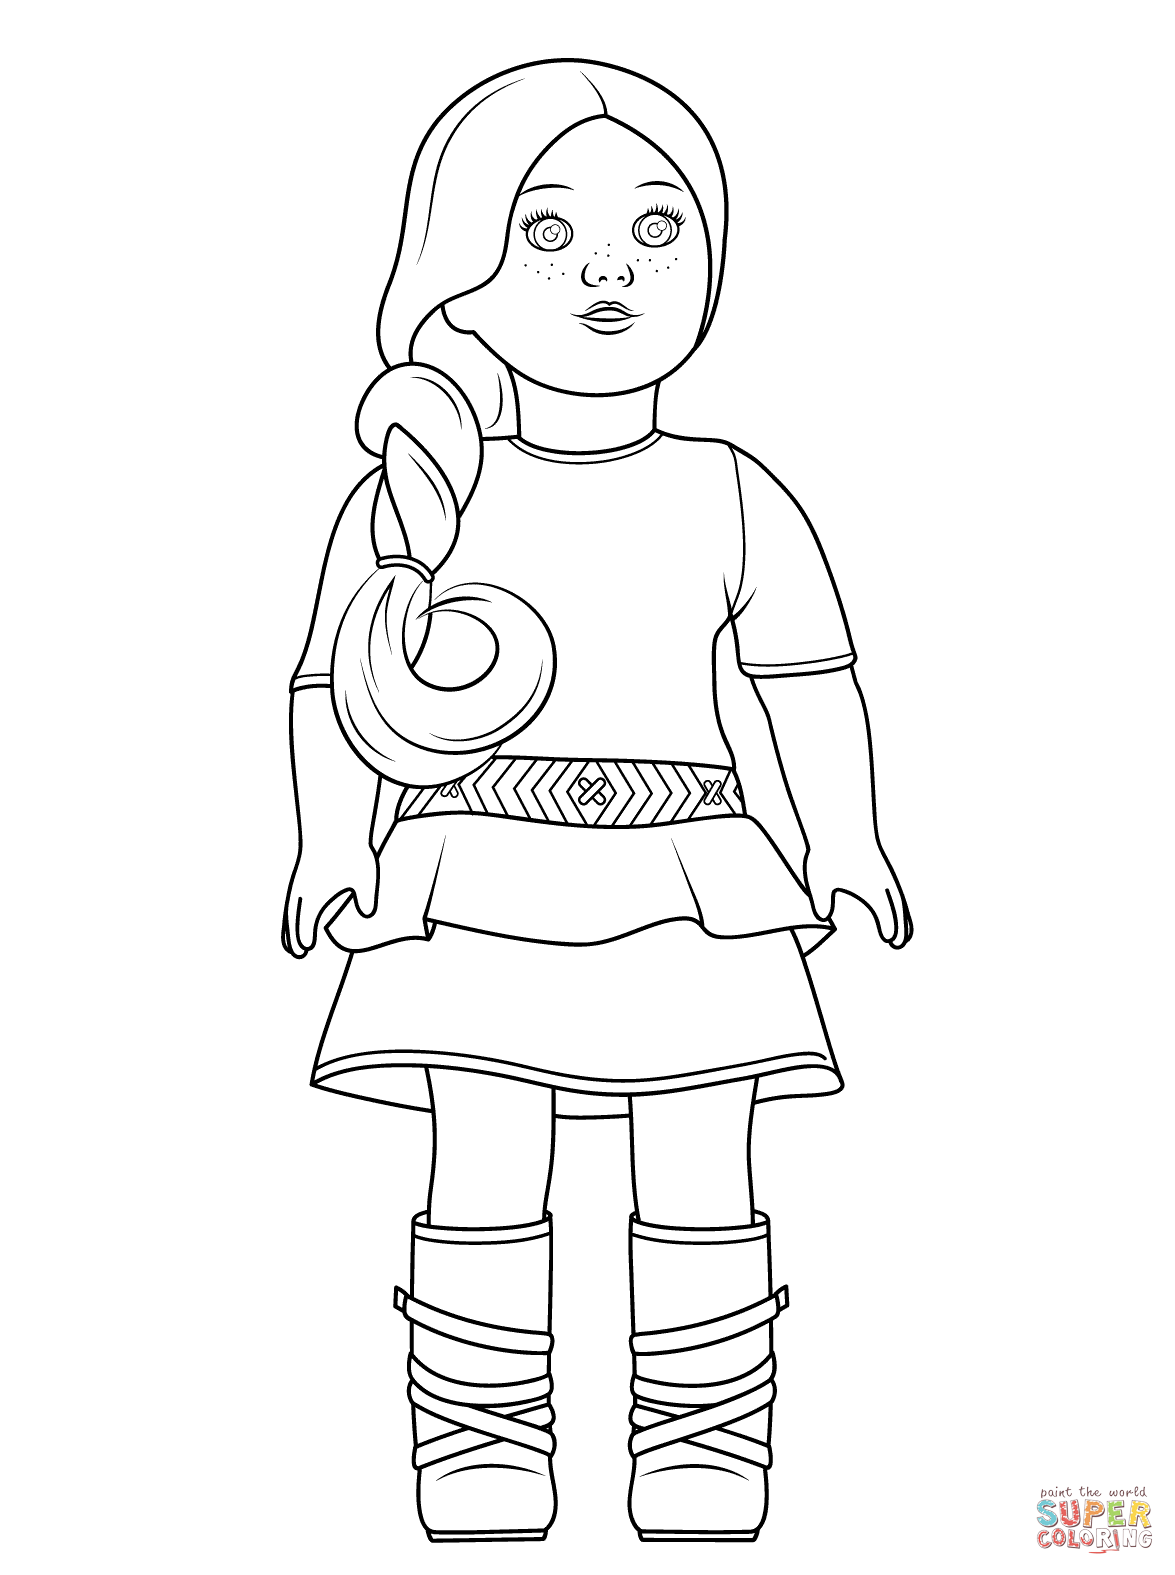 American Girl Saige coloring page | Free Printable Coloring Pages